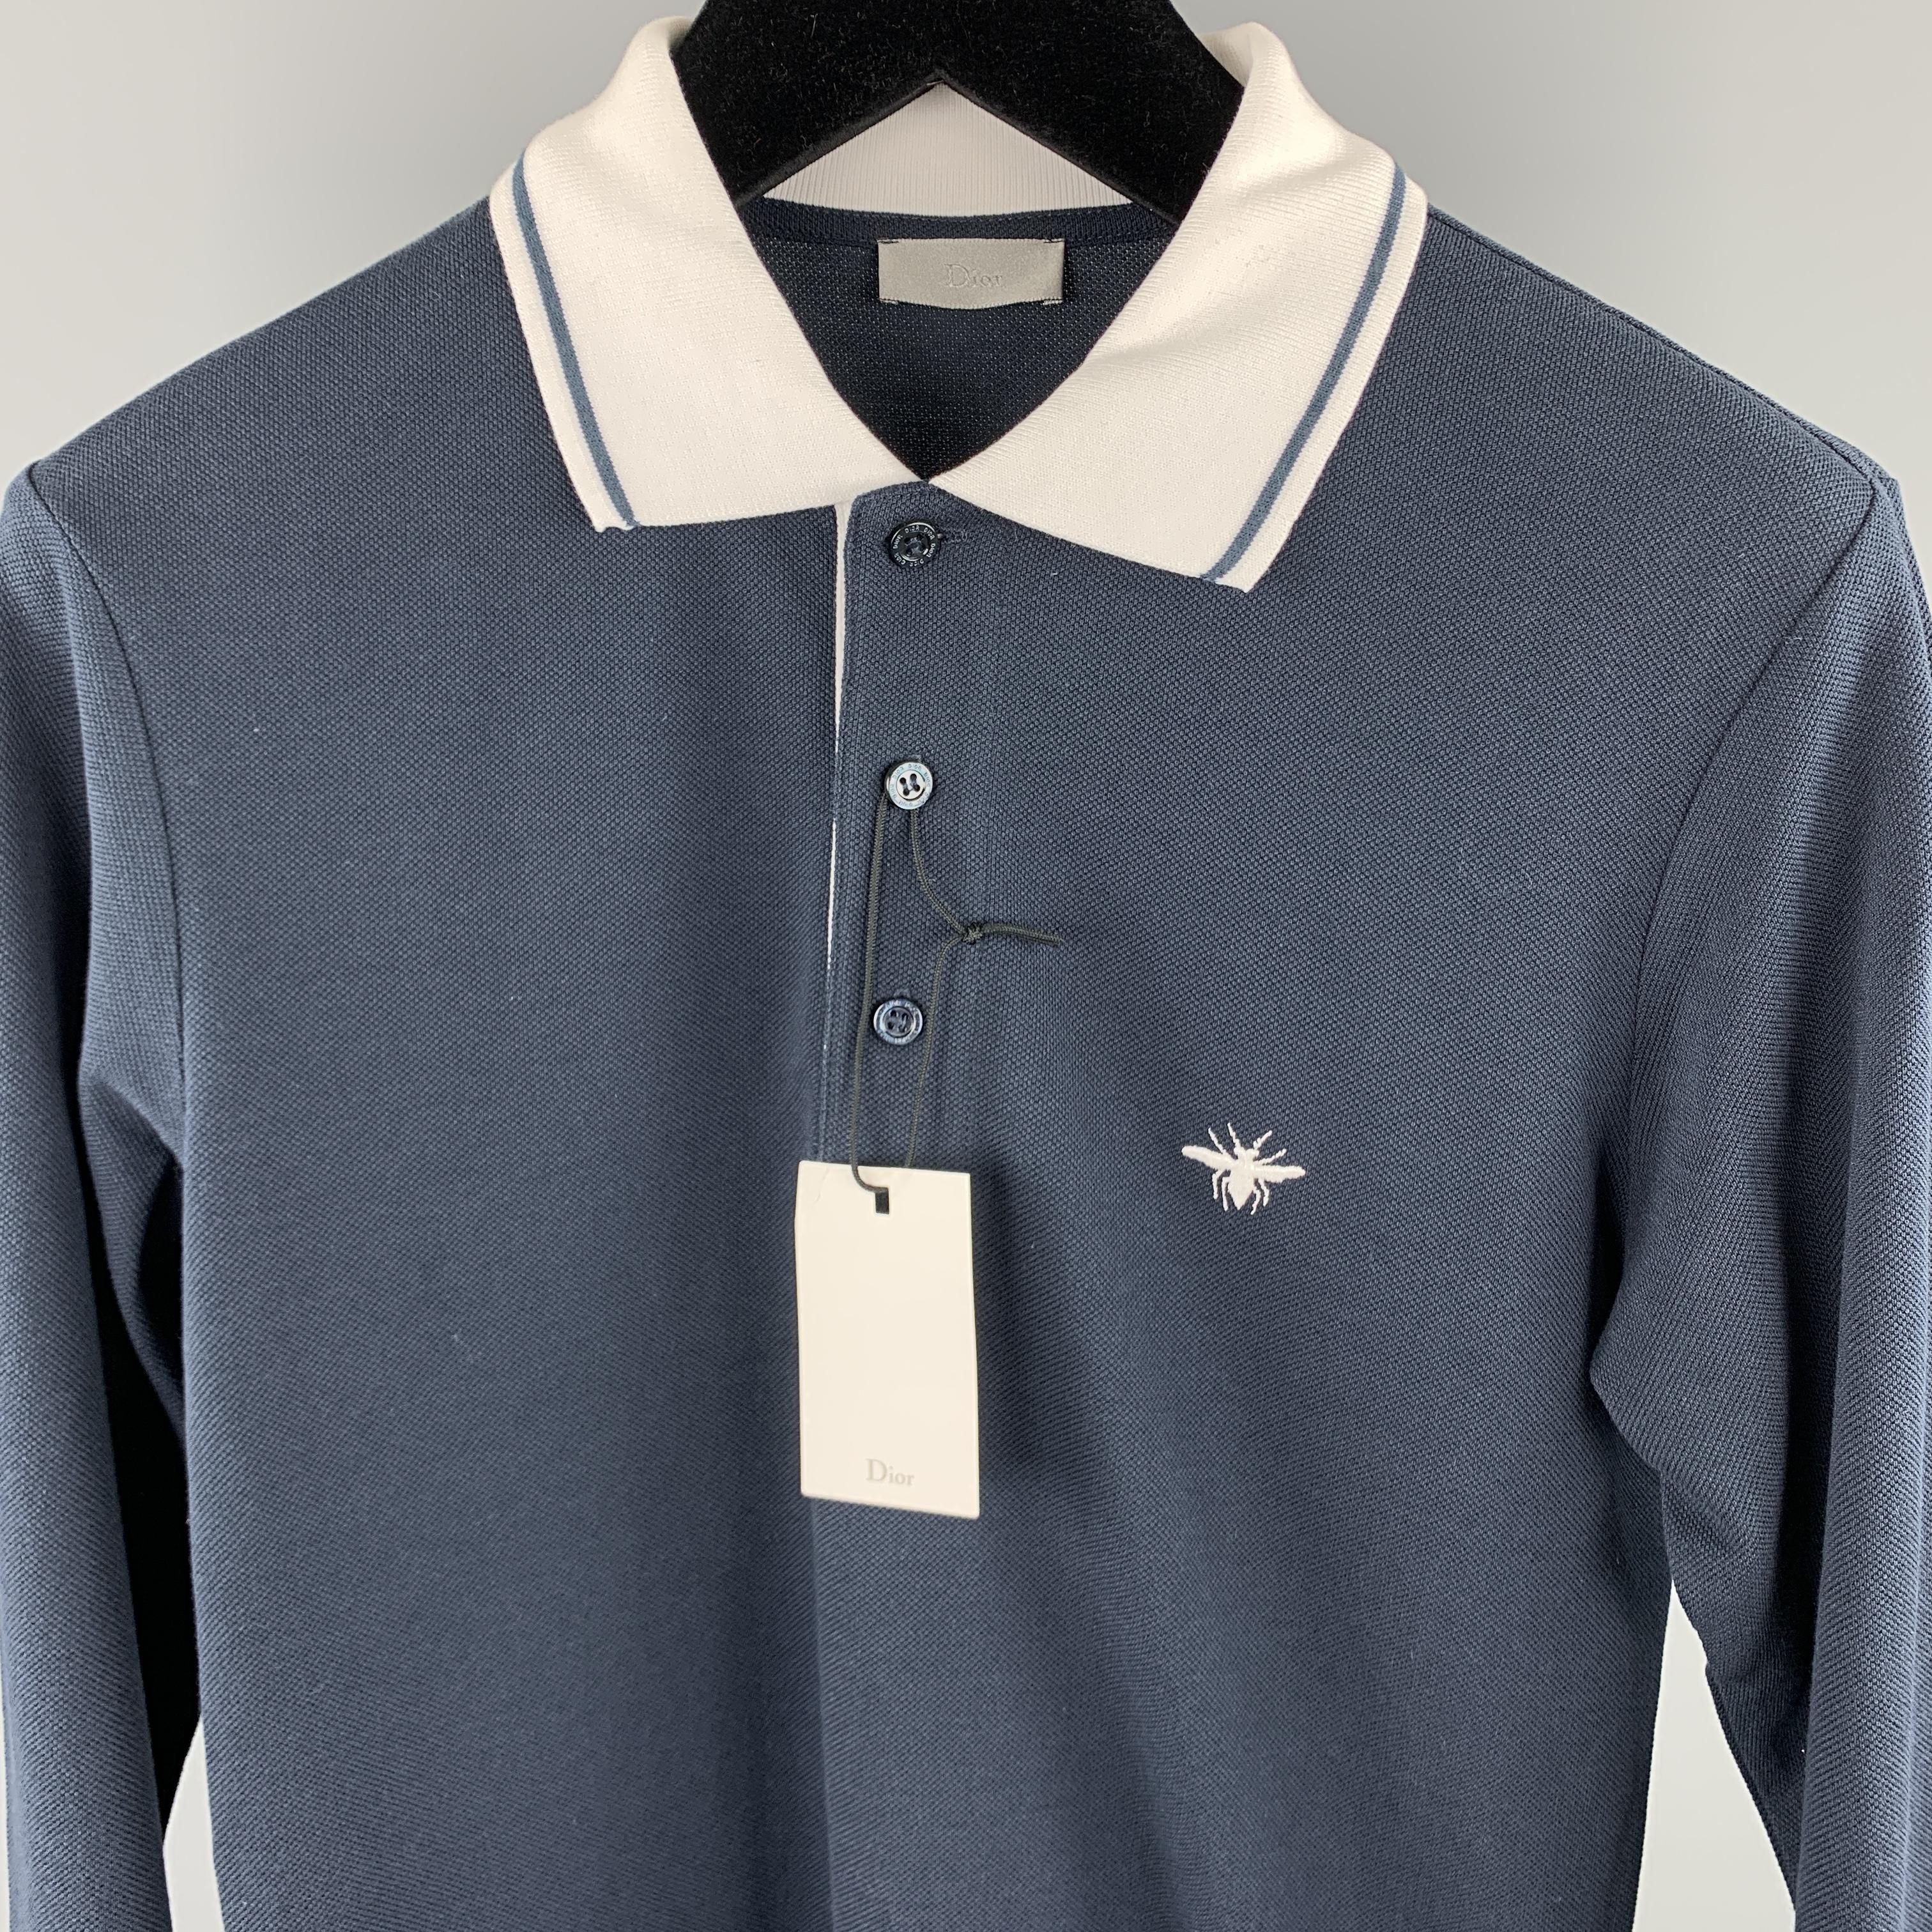 DIOR HOMME long sleeve POLO comes in a solid navy pique material, featuring a contrast white collar, an embroidery at chest, a half buttoned front, and a contrast white trim at cuffs. 

New with Tags.
Marked: IT 44

Measurements:

Shoulder: 16 in.